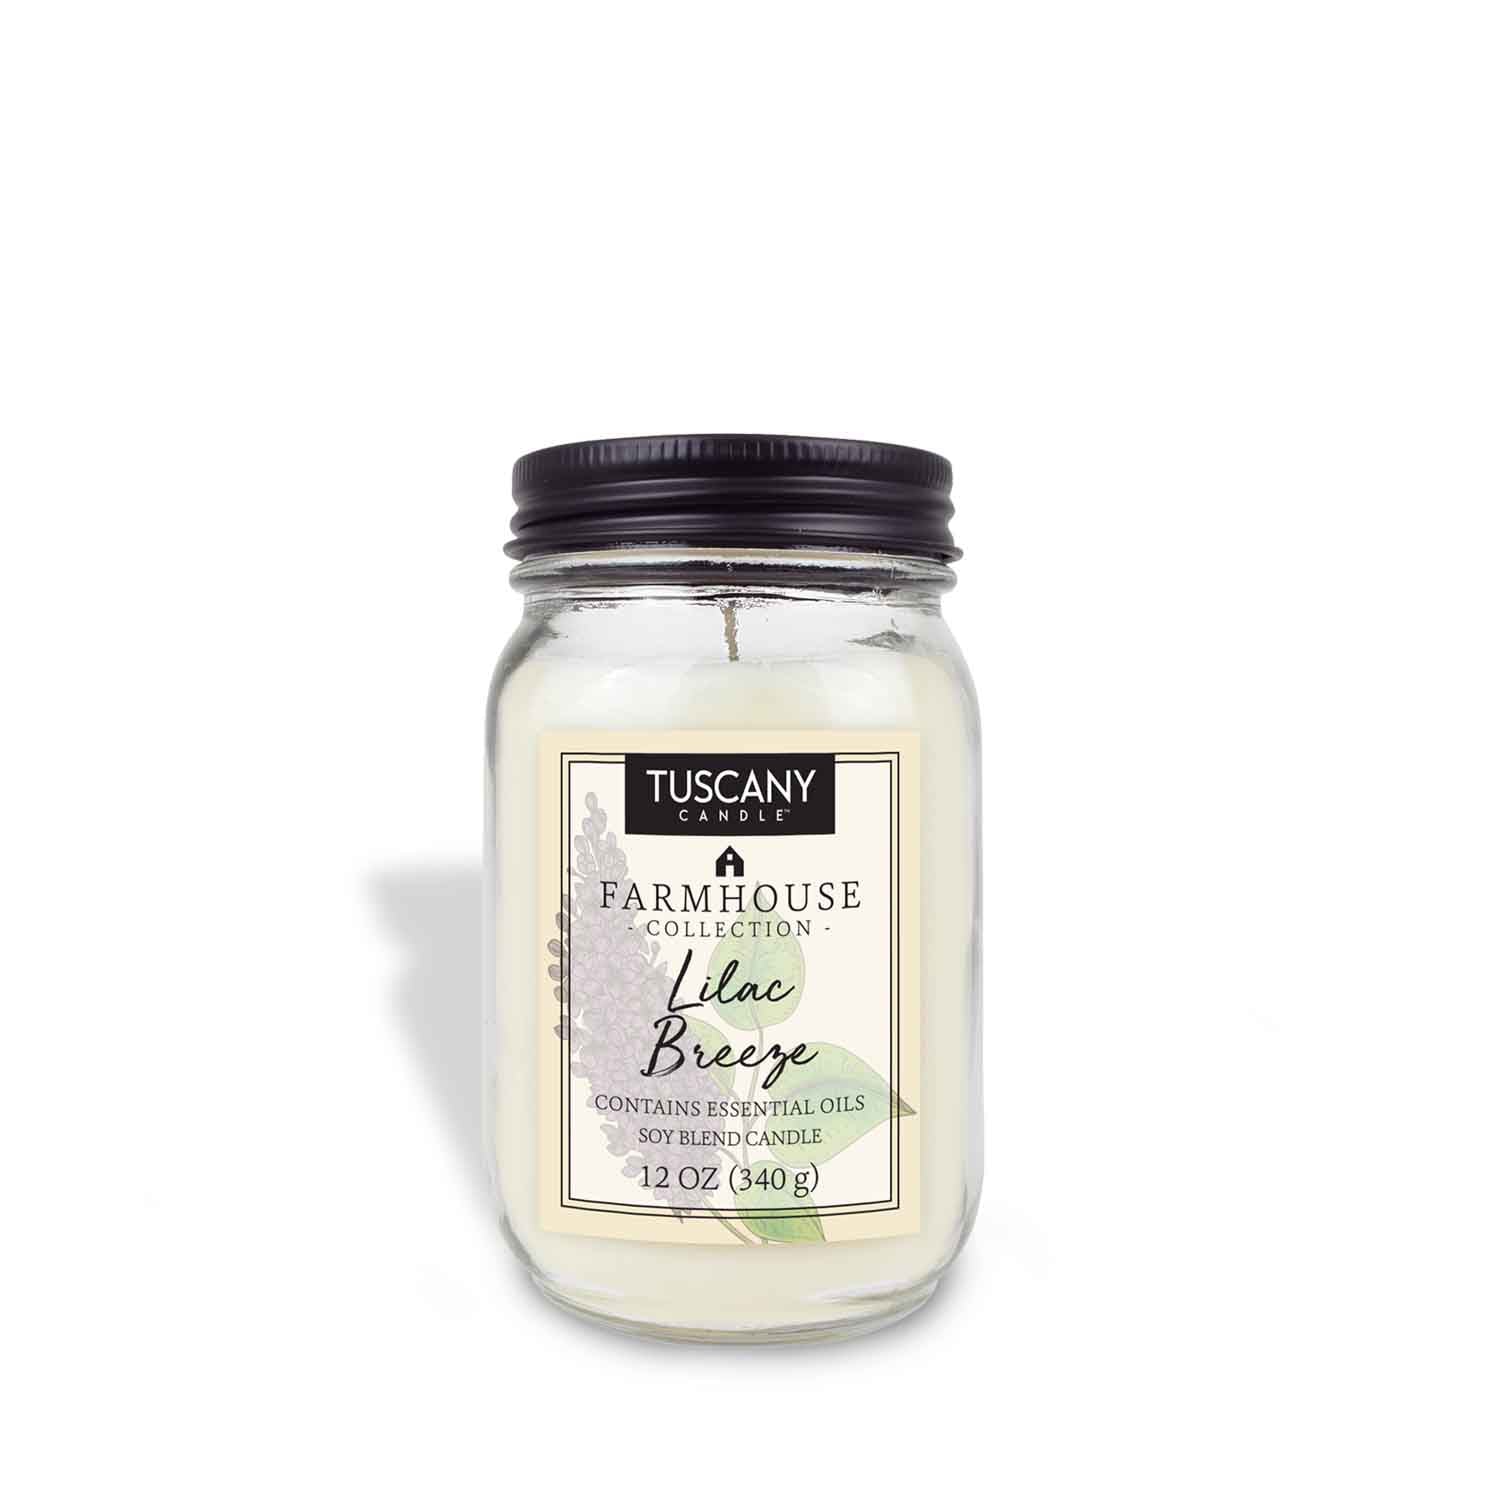 A Lilac Breeze Scented Jar Candle (12 oz) from the Farmhouse Collection by Tuscany Candle® EVD with a white candle.